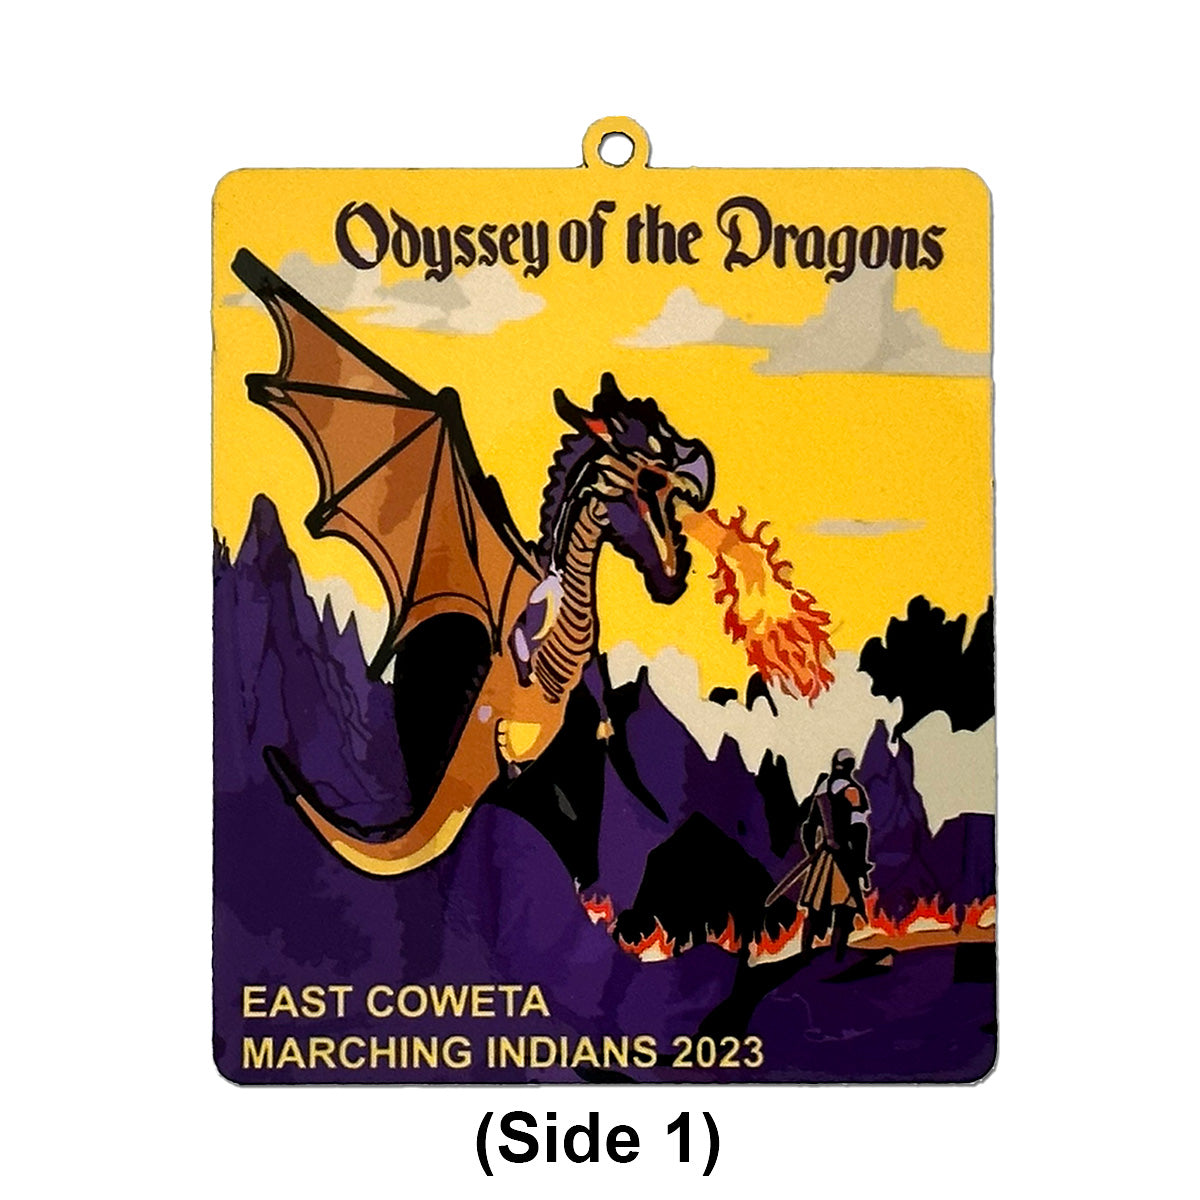 East Coweta Marching Band Show Ornament 2023 - Odyssey of the Dragons